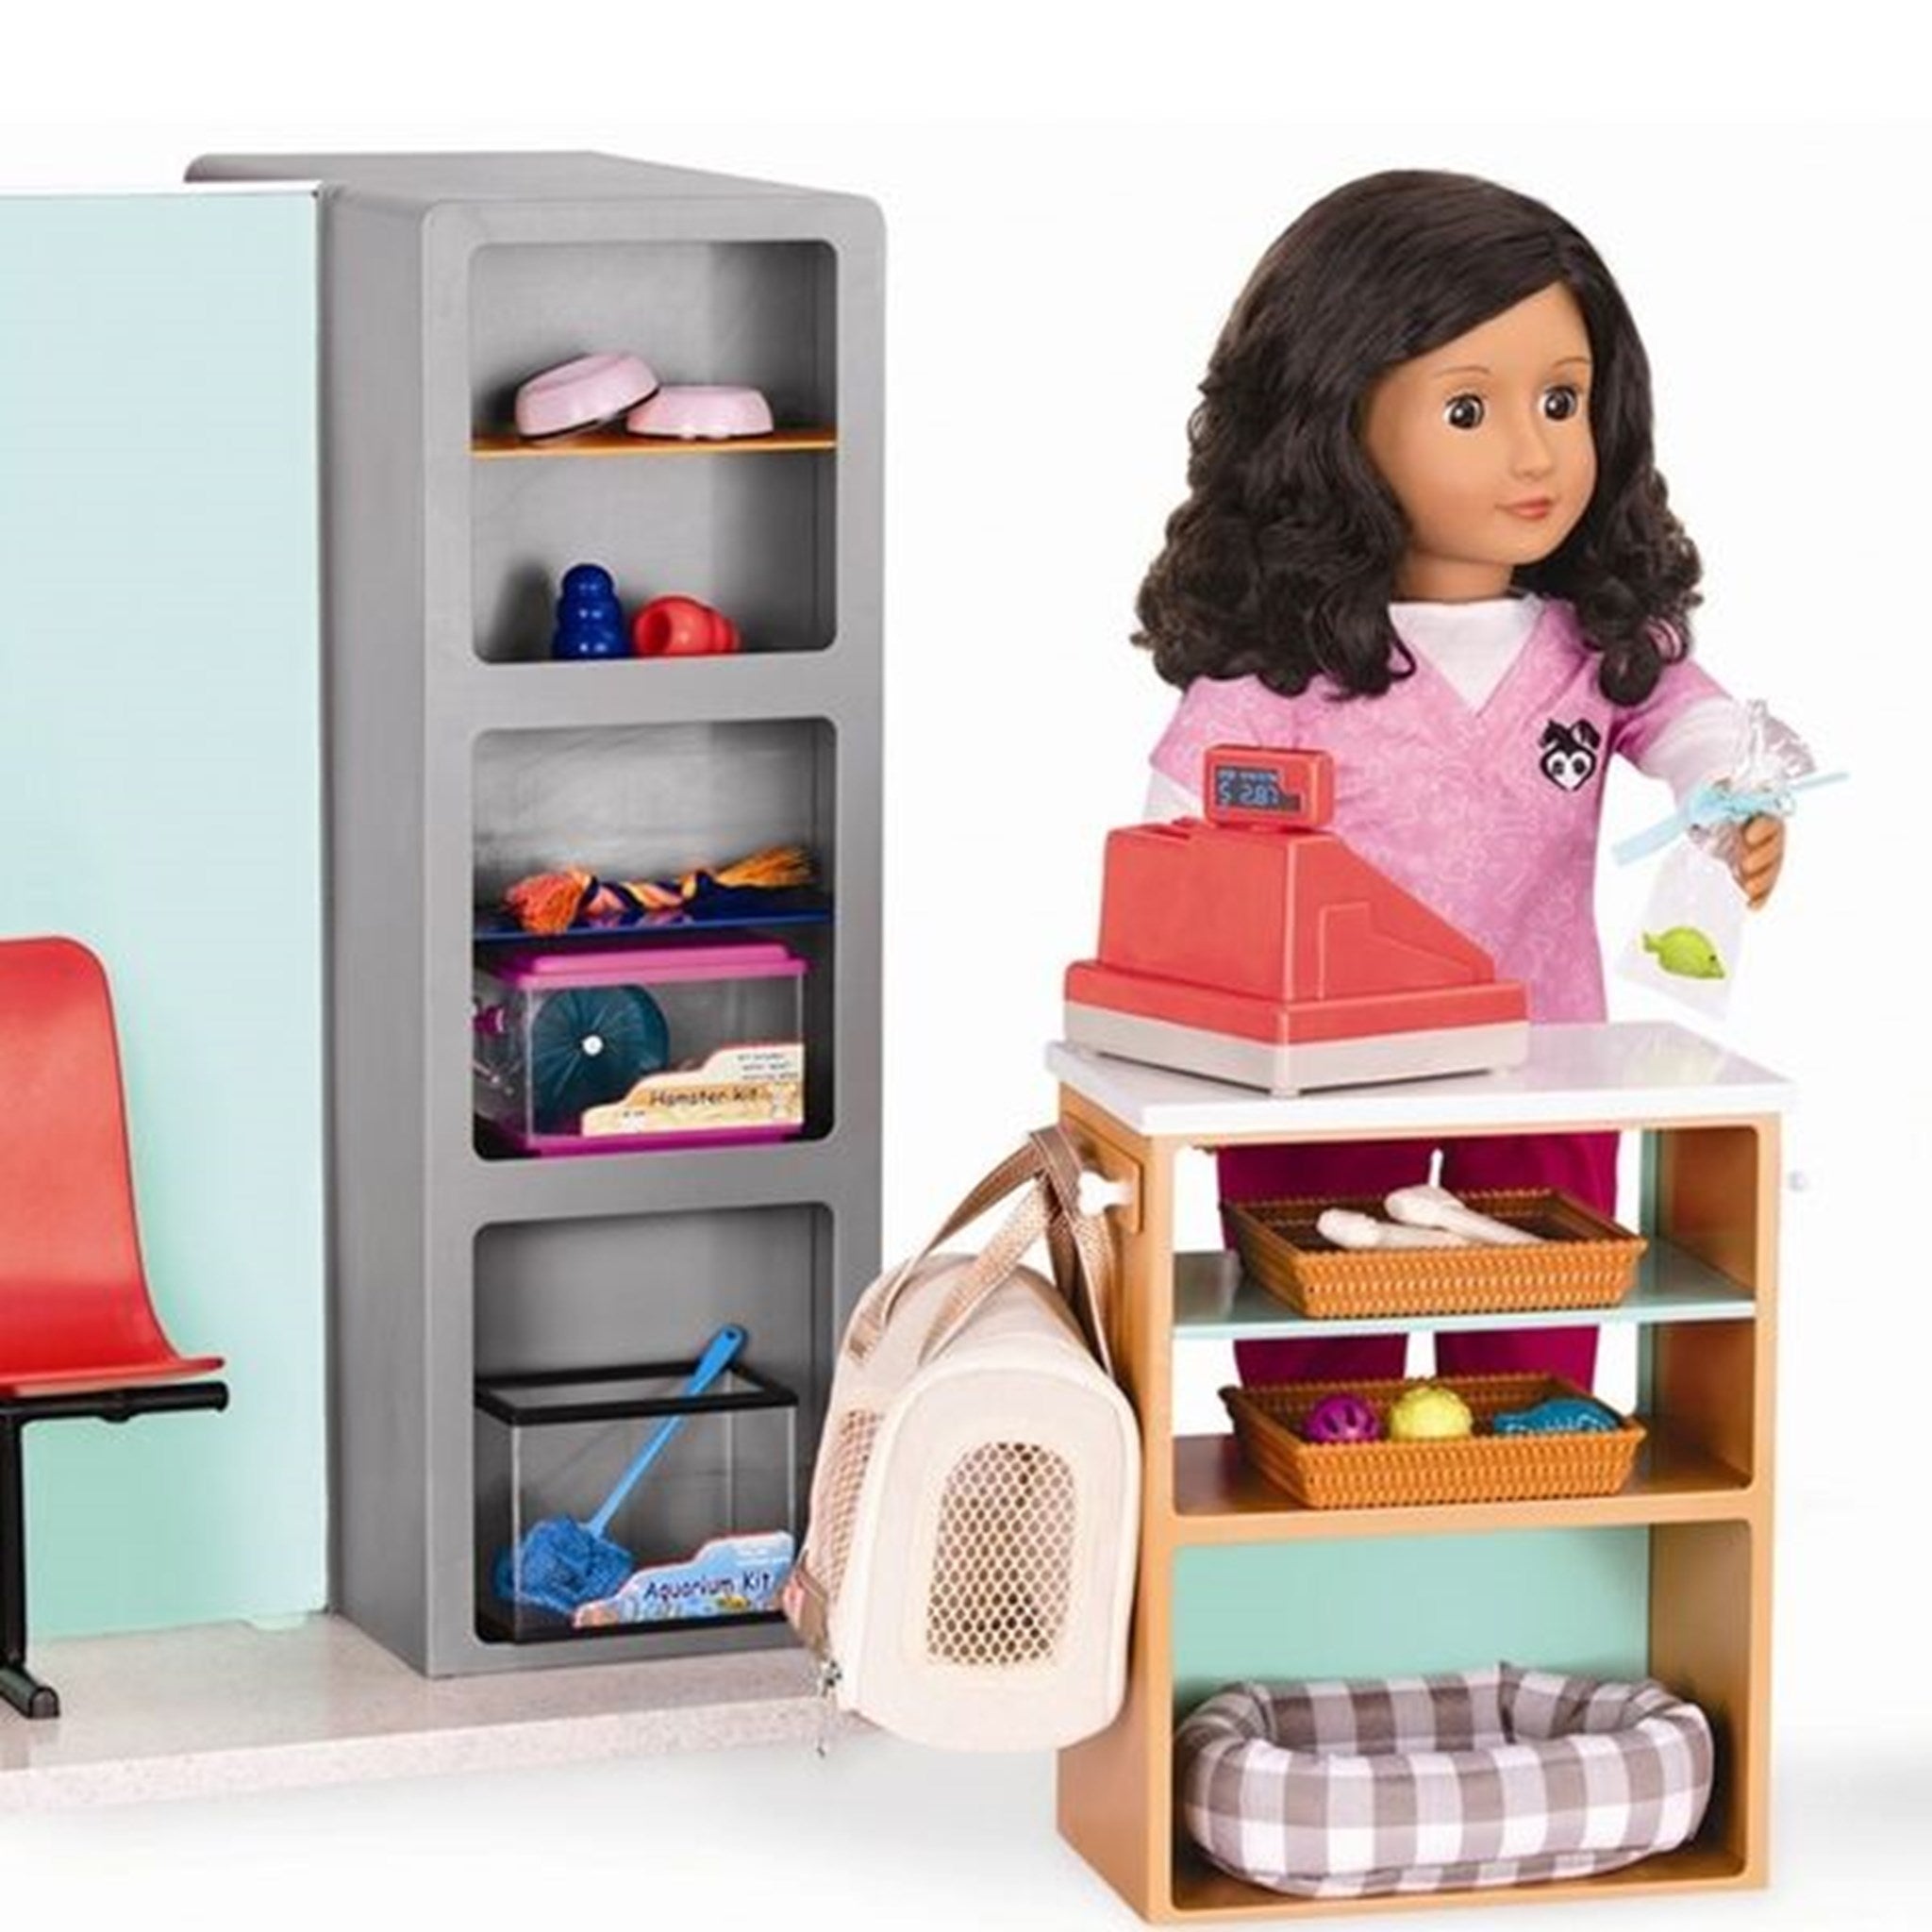 Our Generation Doll Accessories - Pet Store 2